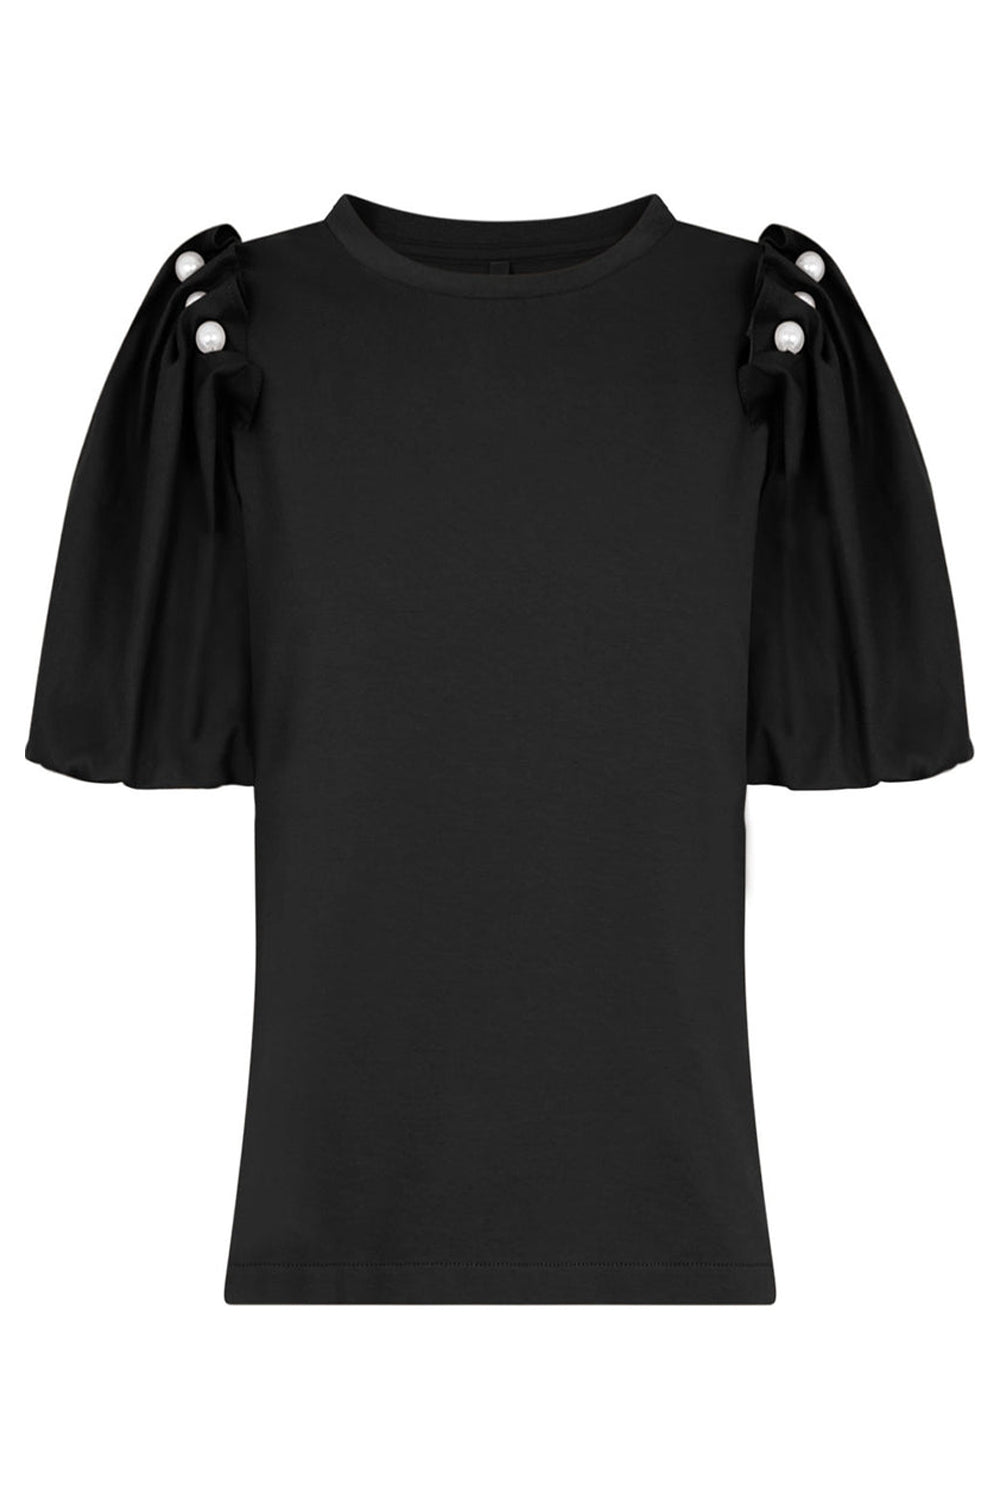 MOTHER OF PEARL RTW HOPE PUFF SLEEVE T-SHIRT | BLACK